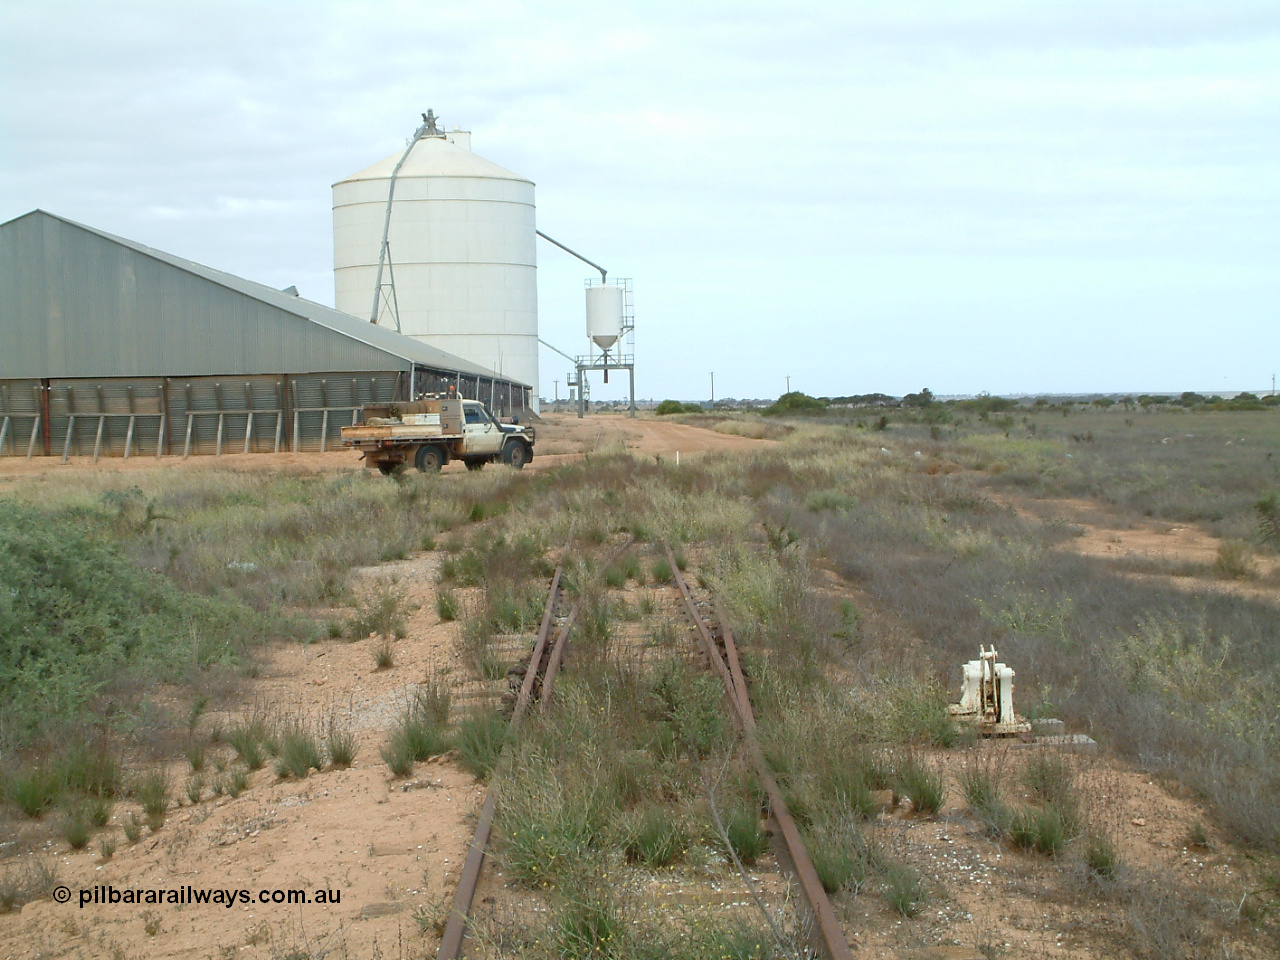 030414 153405
Penong, looking east from the end of line along the grain loop, 'mainline' peels off to the right, horizontal bunker block 3 on the left with an Ascom silo complex block 1 behind that.
